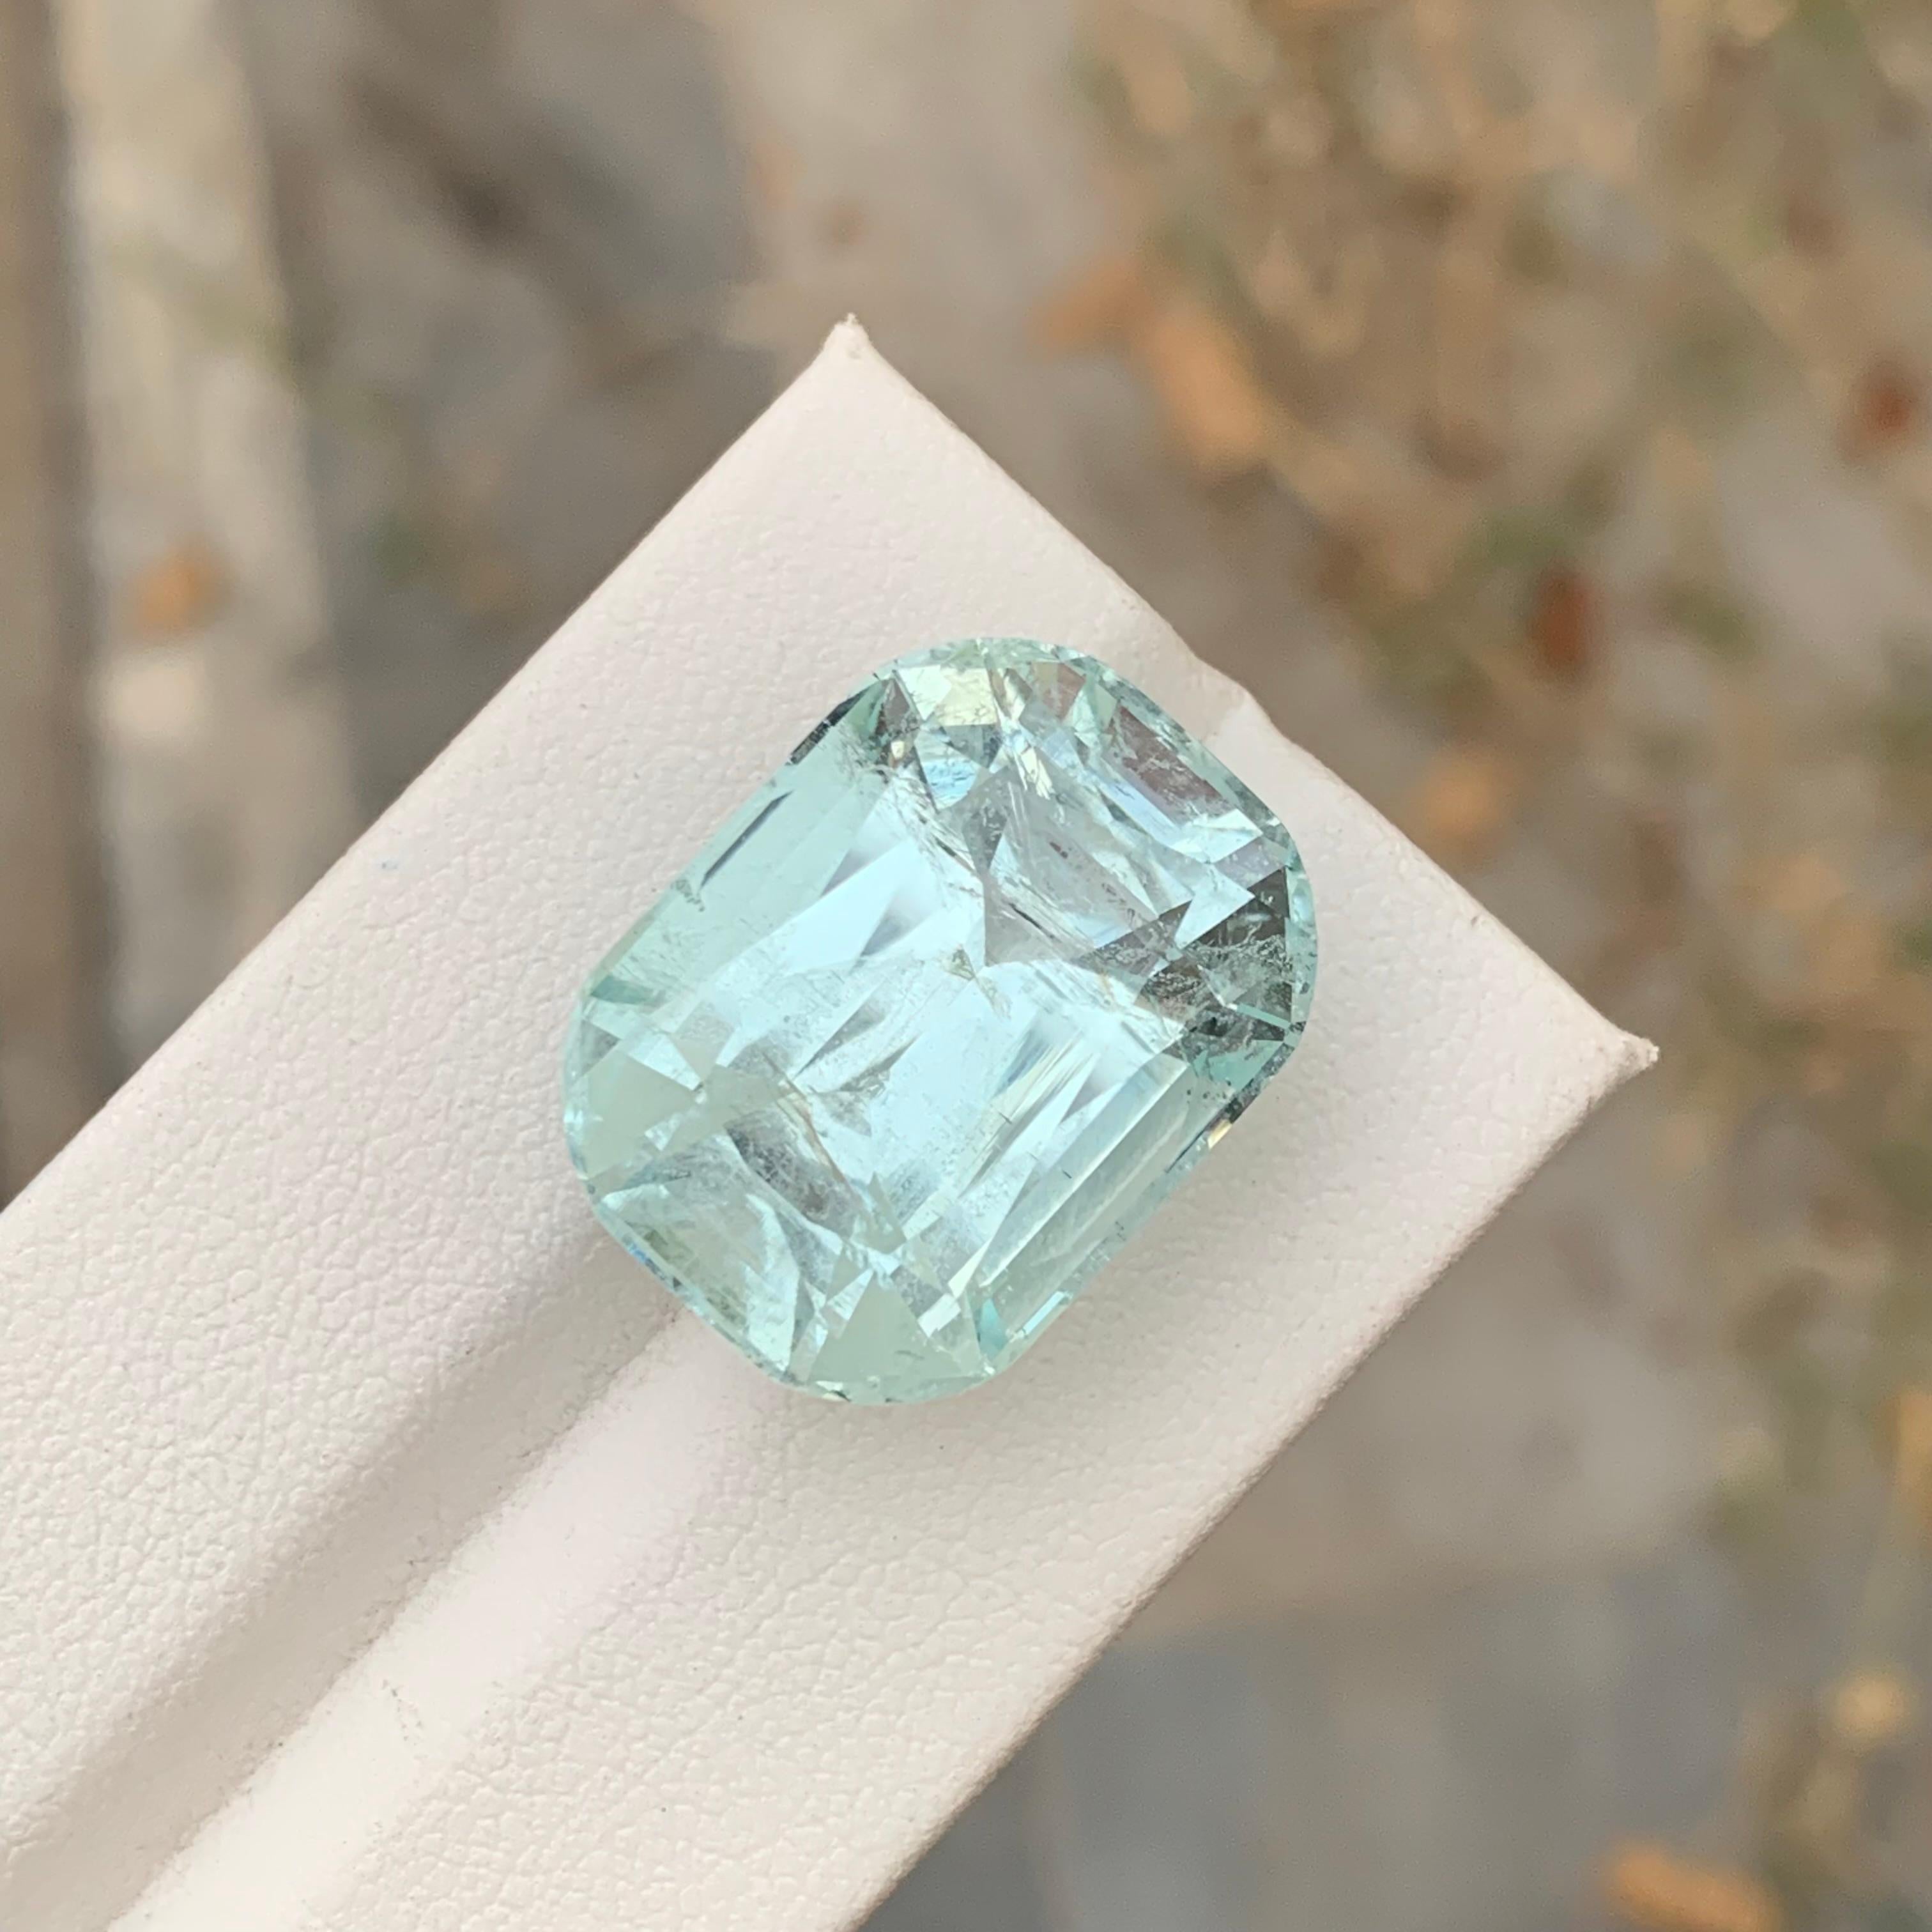 29.75 Carats Gigantic Natural Loose Aquamarine Included Gem For Necklace Jewelry For Sale 2